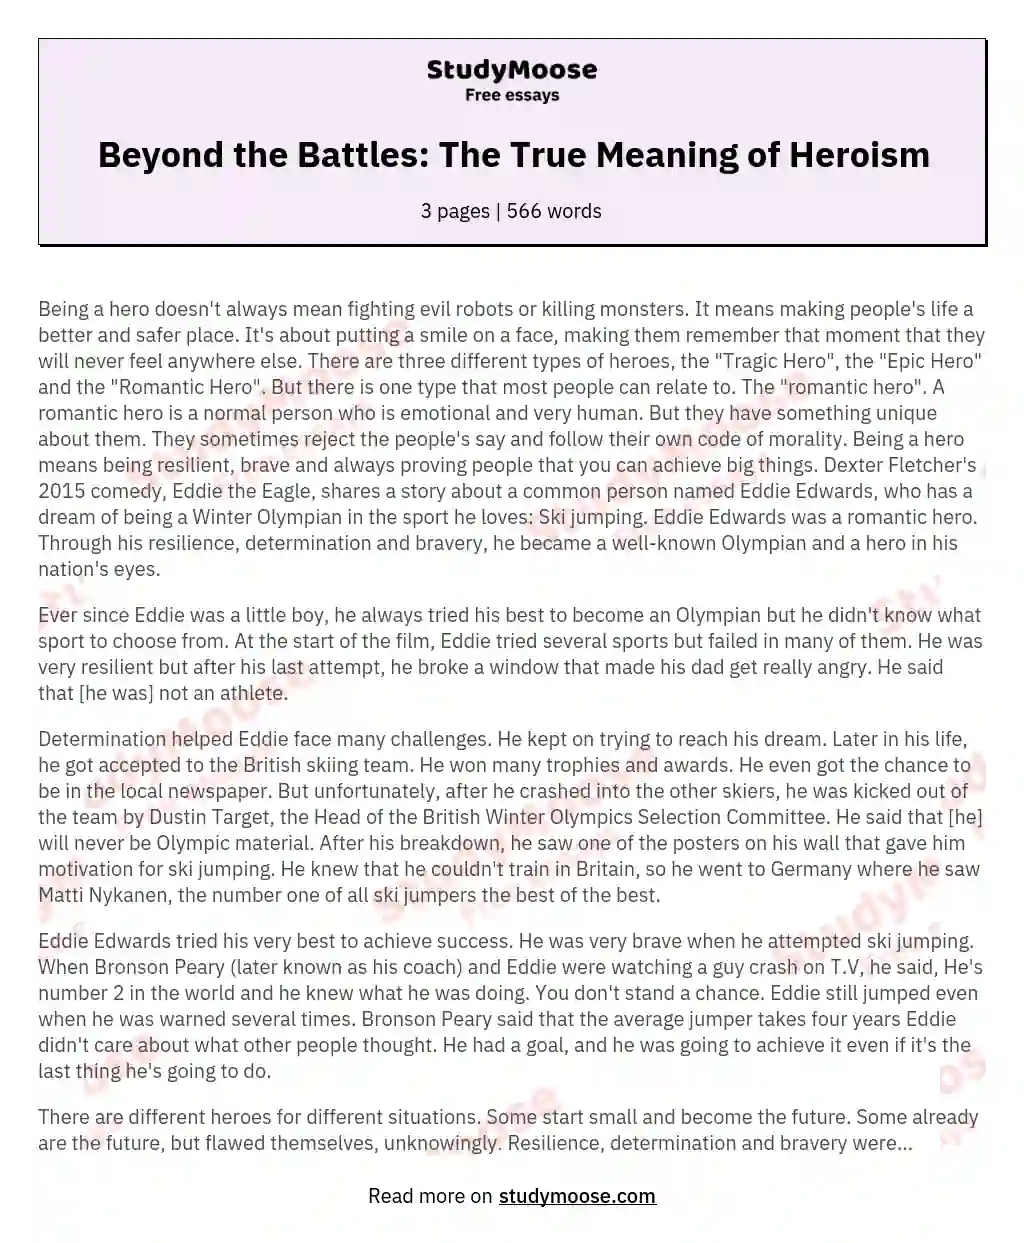 Beyond the Battles: The True Meaning of Heroism essay